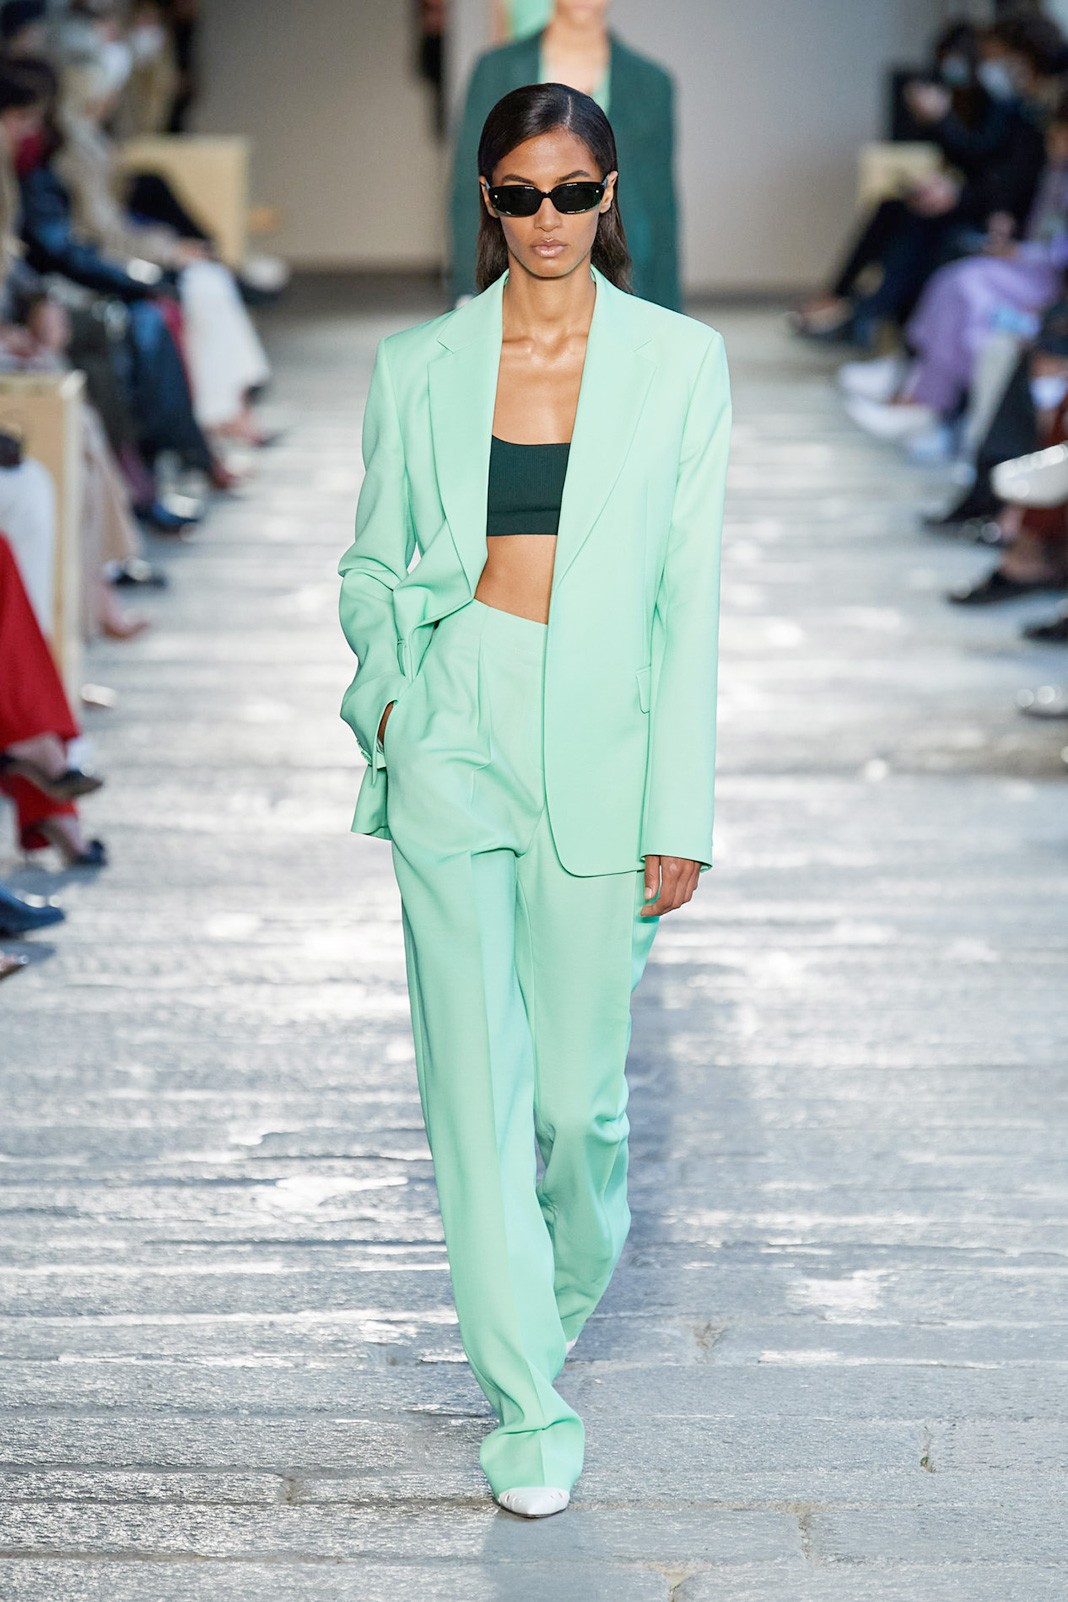 Hugo Boss Spring/Summer 2021 Ready-to-Wear Collection